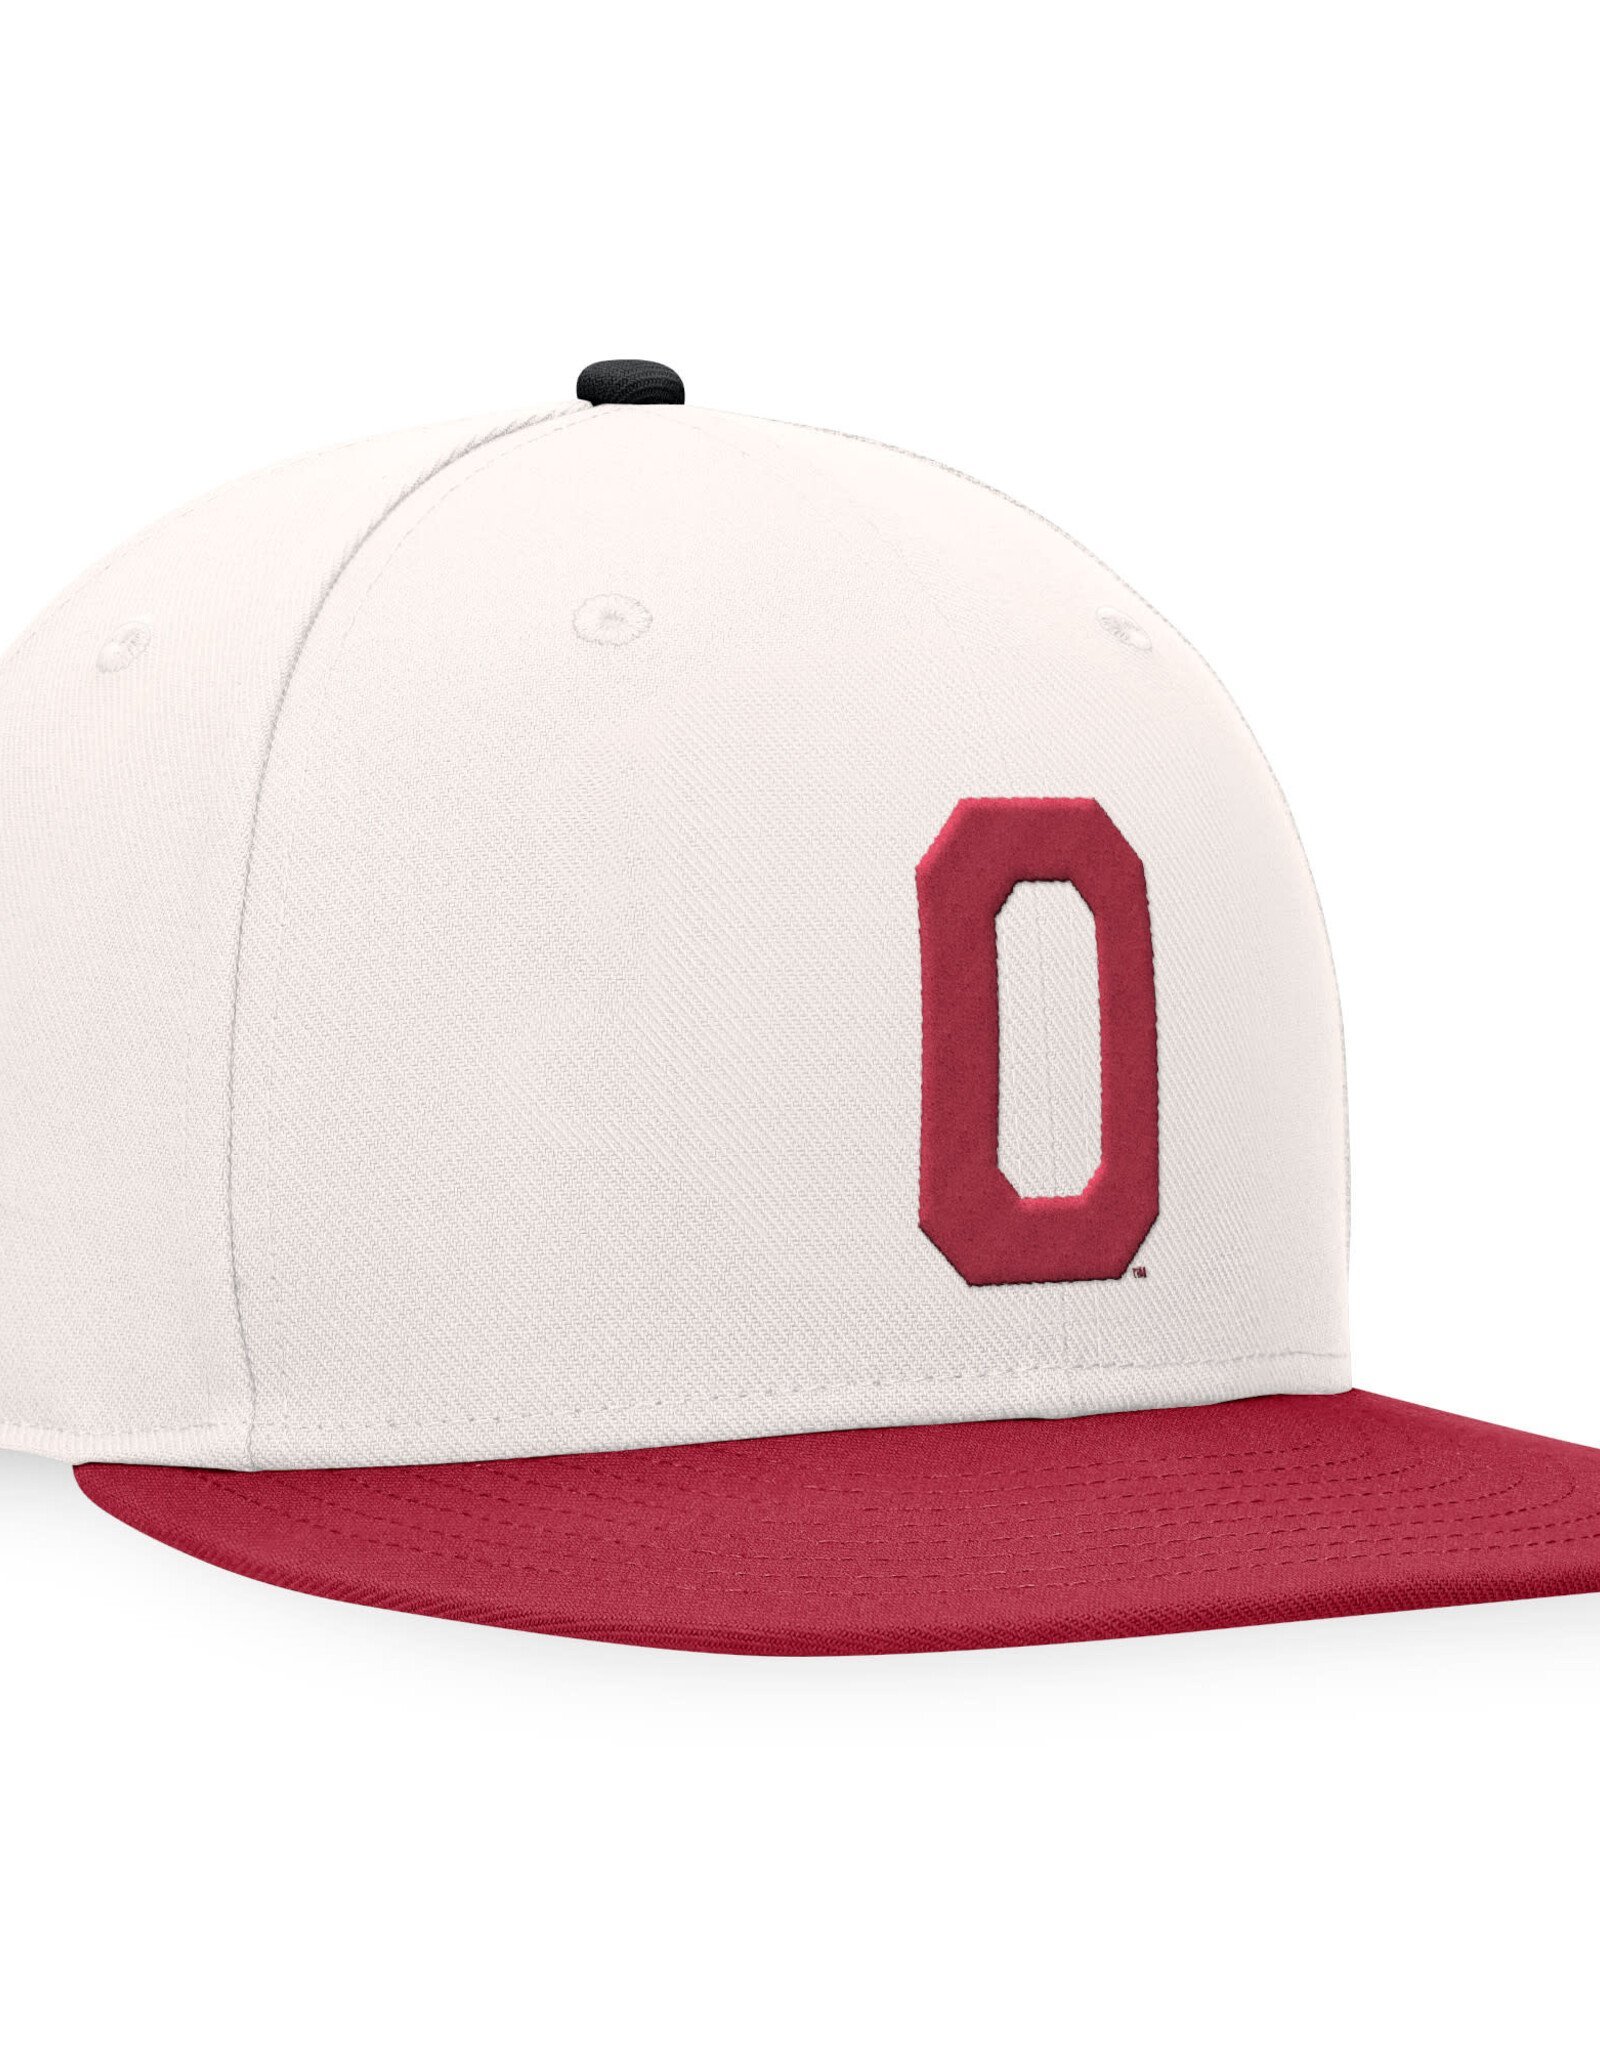 TOW TOW Oklahoma Vintage "O" Fitted Hat